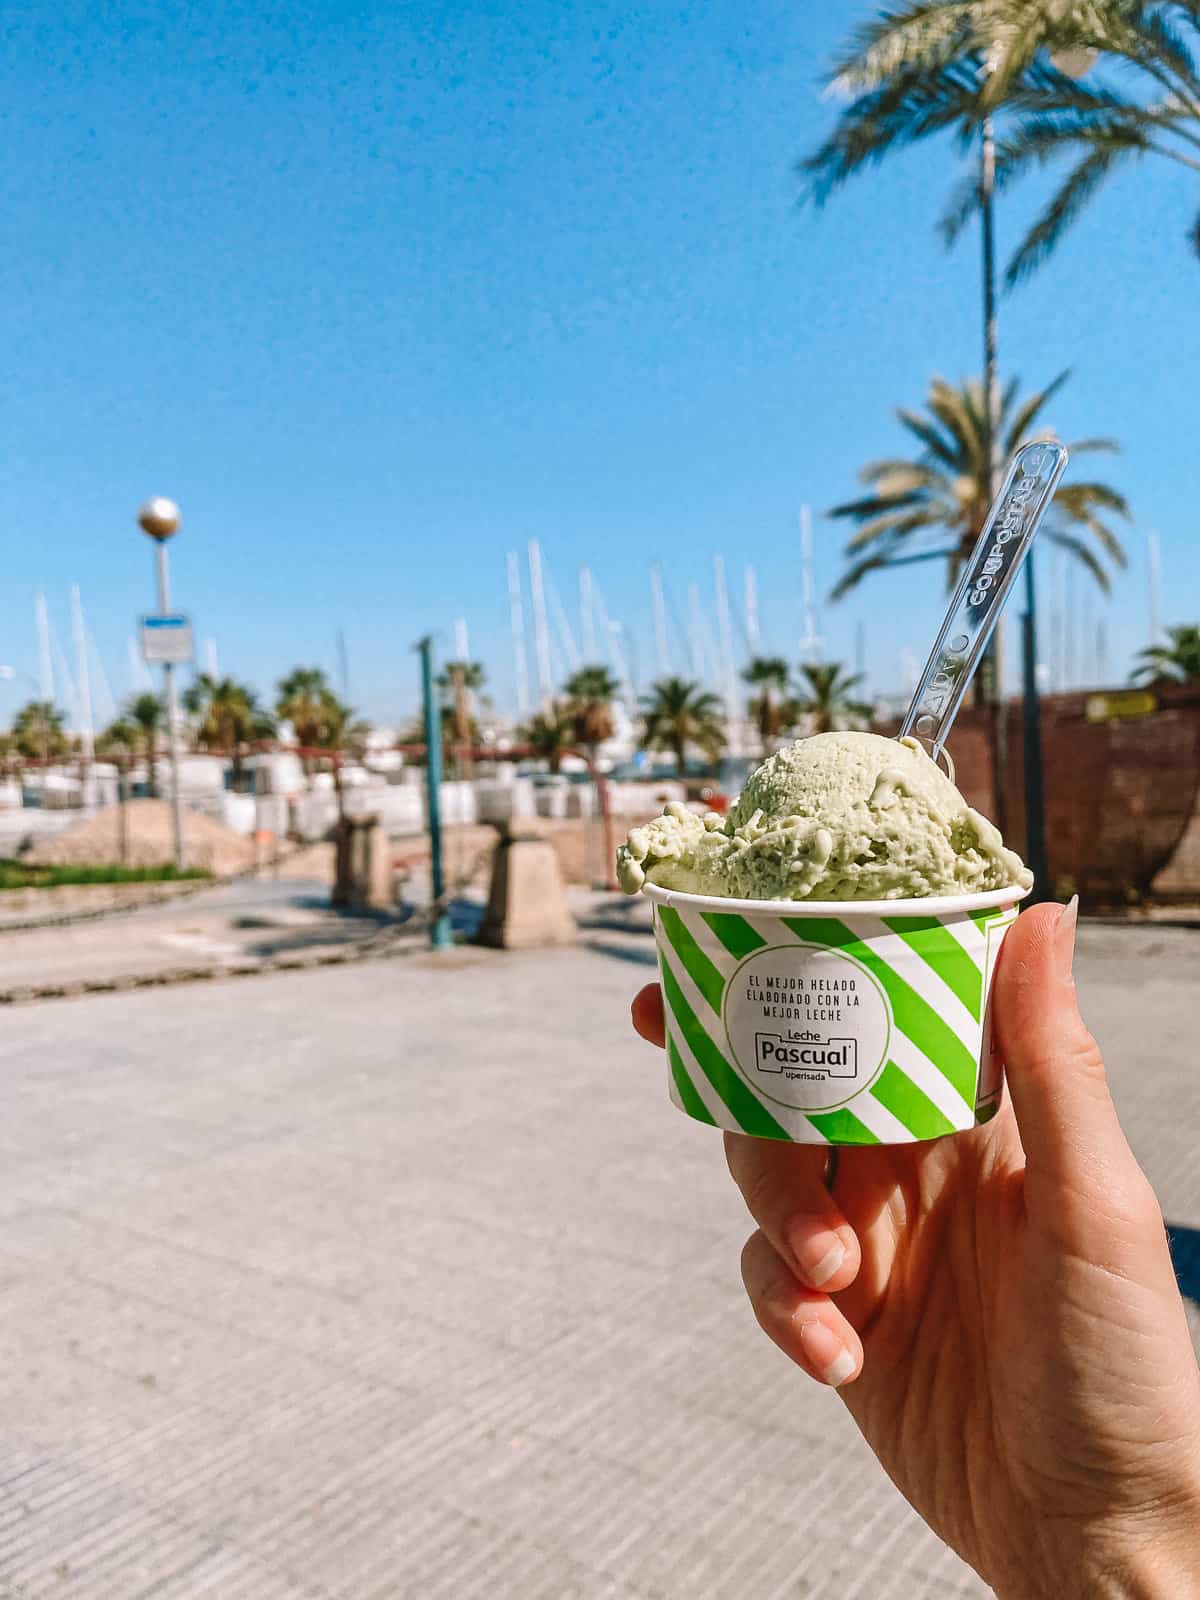 A hand holding a cup of Pistachio Gelato on a boardwalk